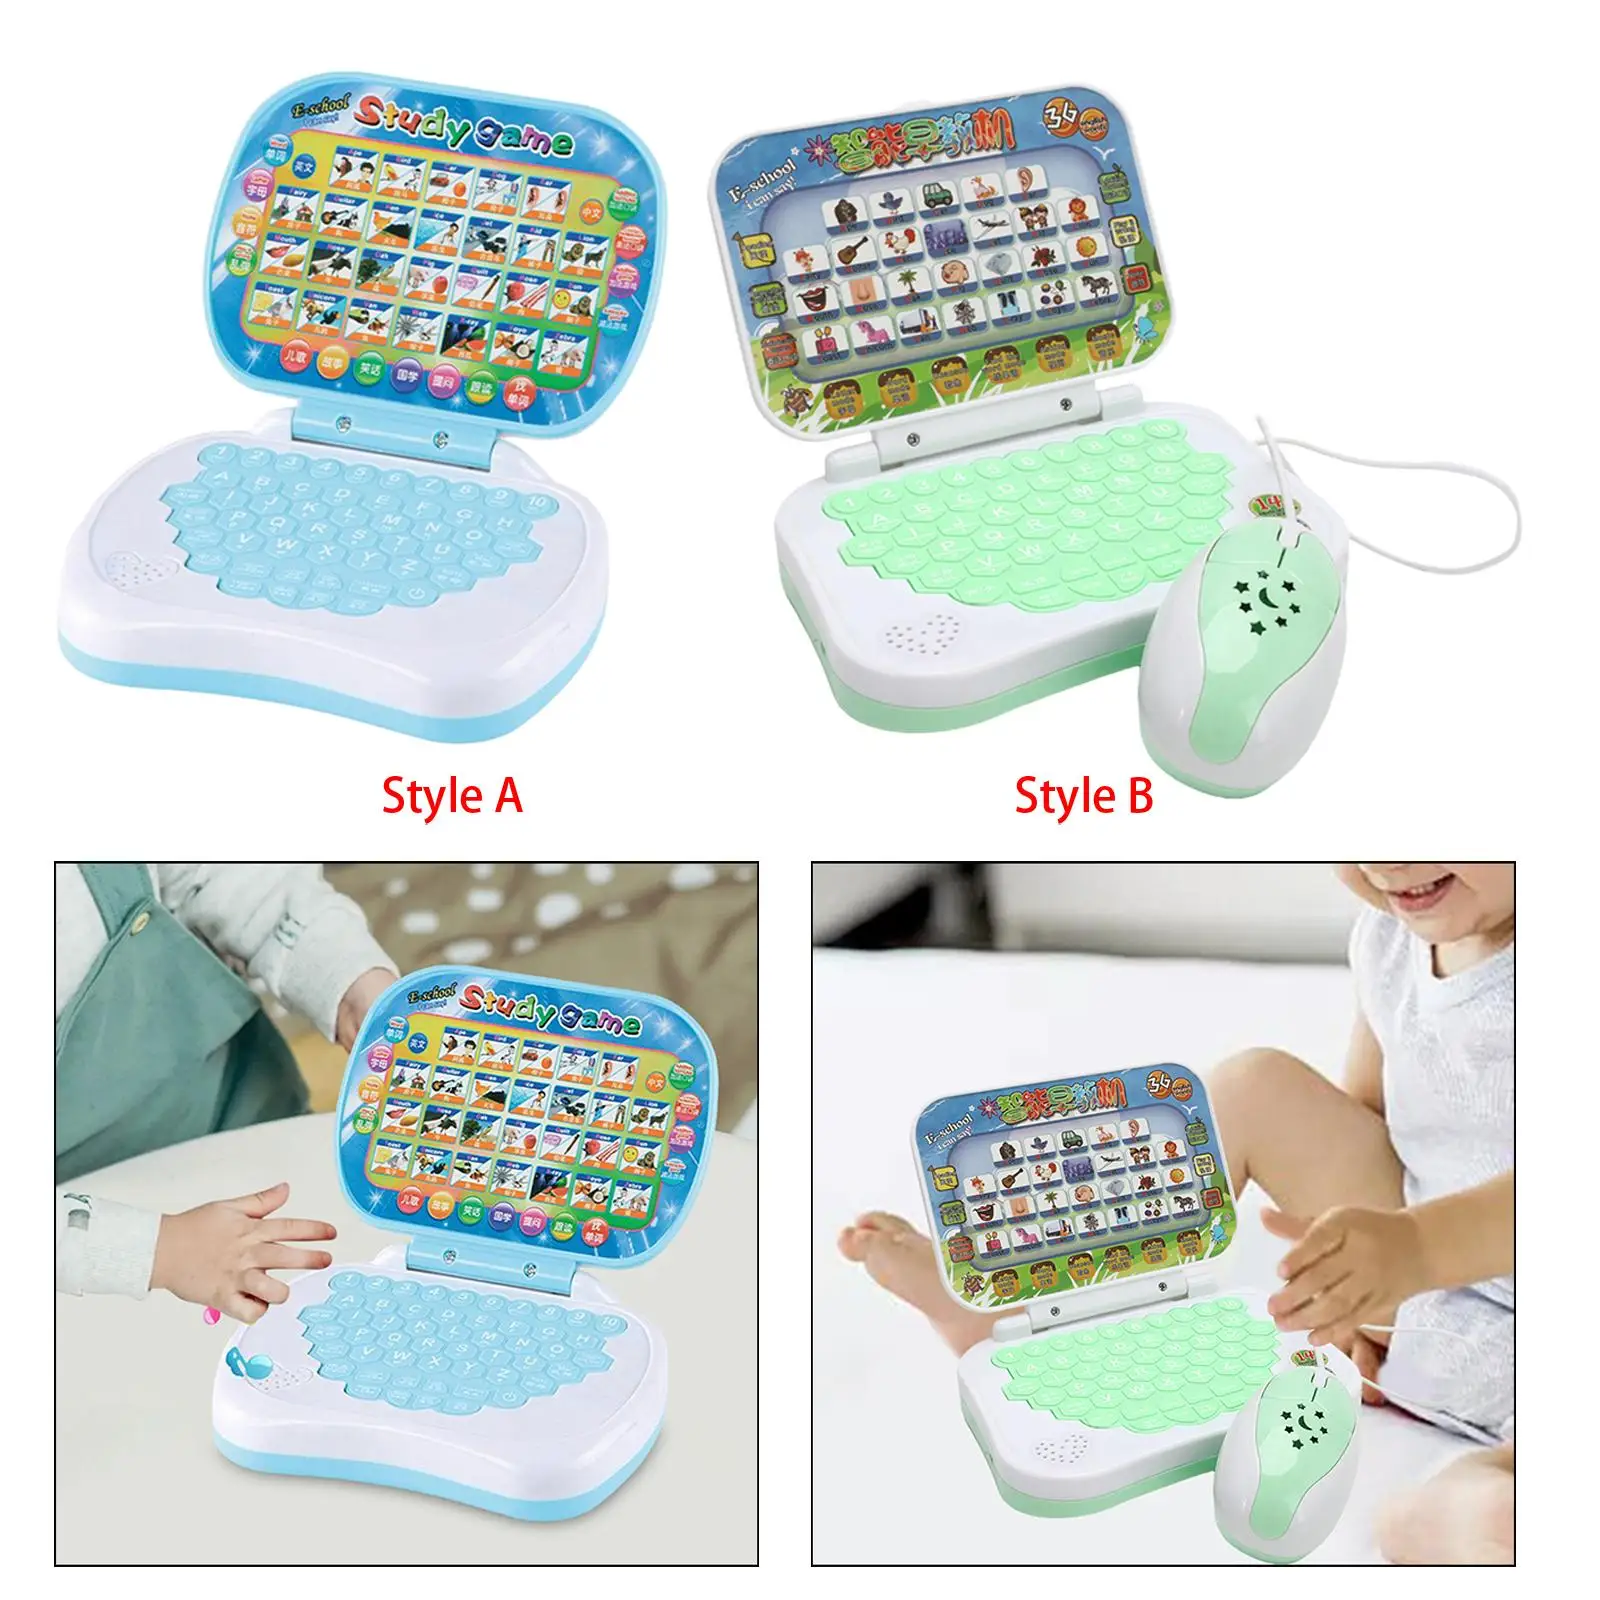 Multifunction Learning Machine Study Game Early Education Activities Computer Kids Laptop Toy for Girls Boys Toddler Kids